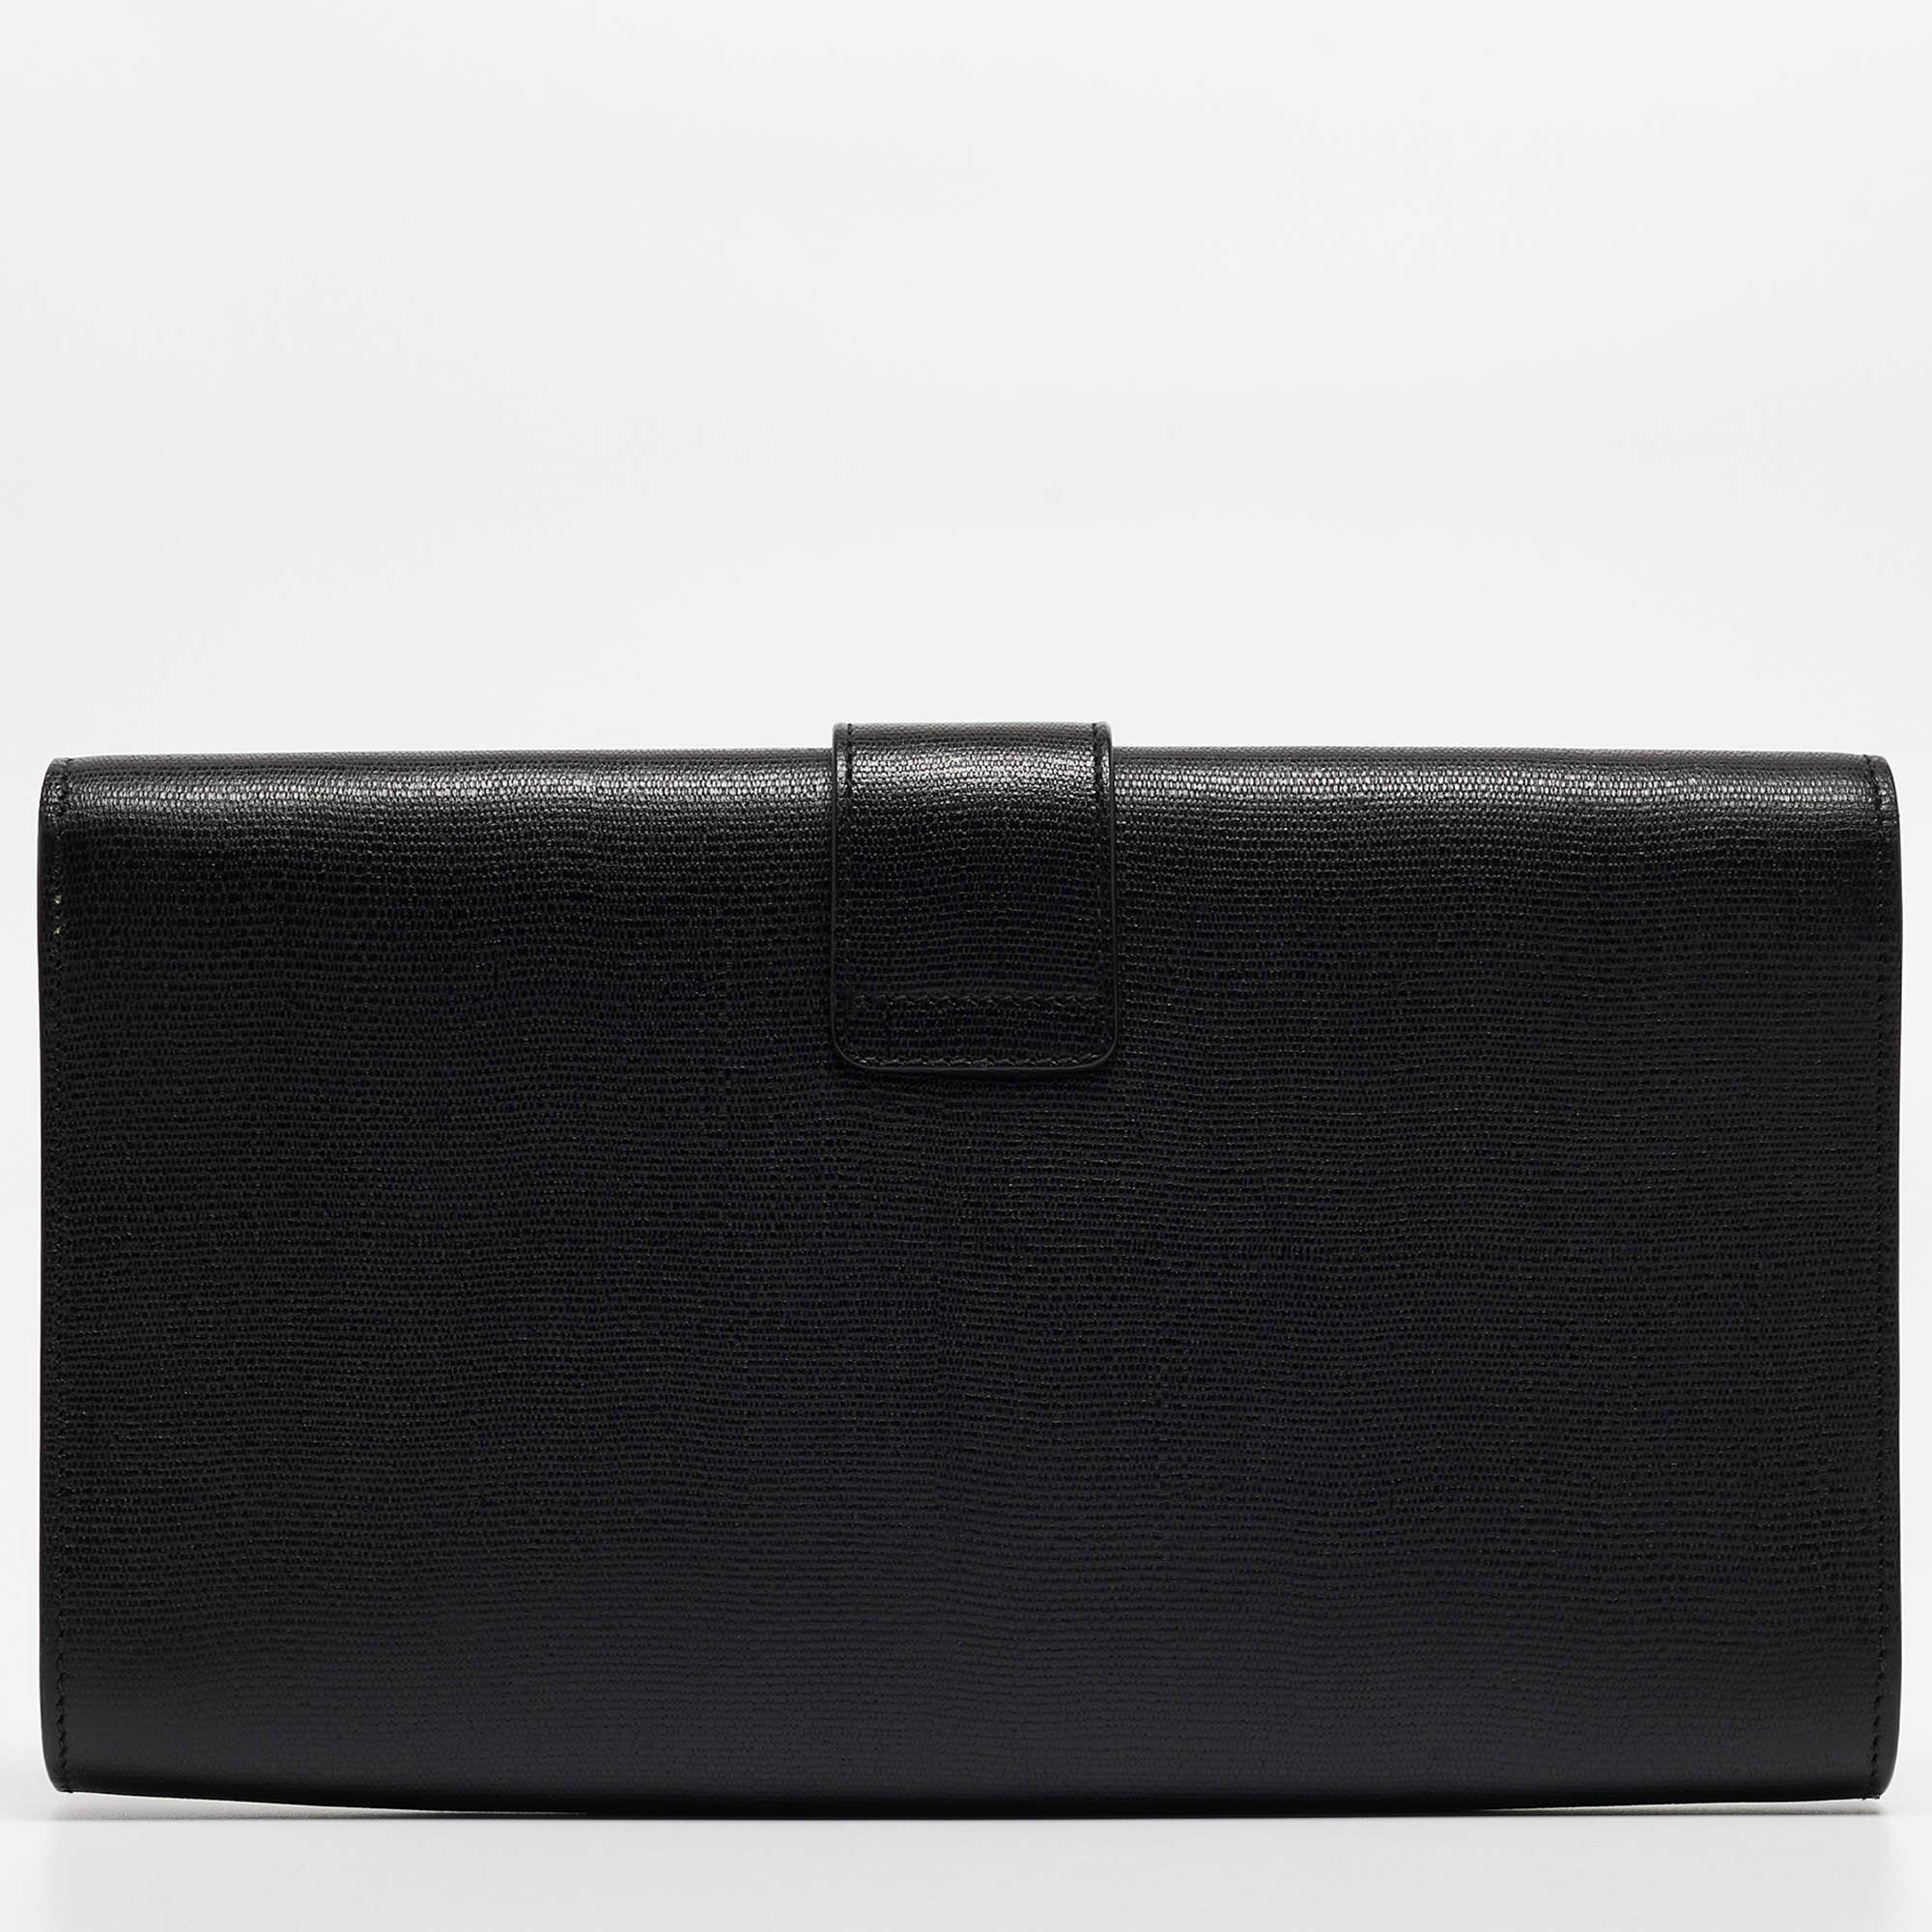 A simple design highlighted by a gold-tone Y on the front. The Y line clutch by Saint Laurent is crafted from black leather and designed in a flap style. It has a spacious satin interior where you can carry your cards, cash and other